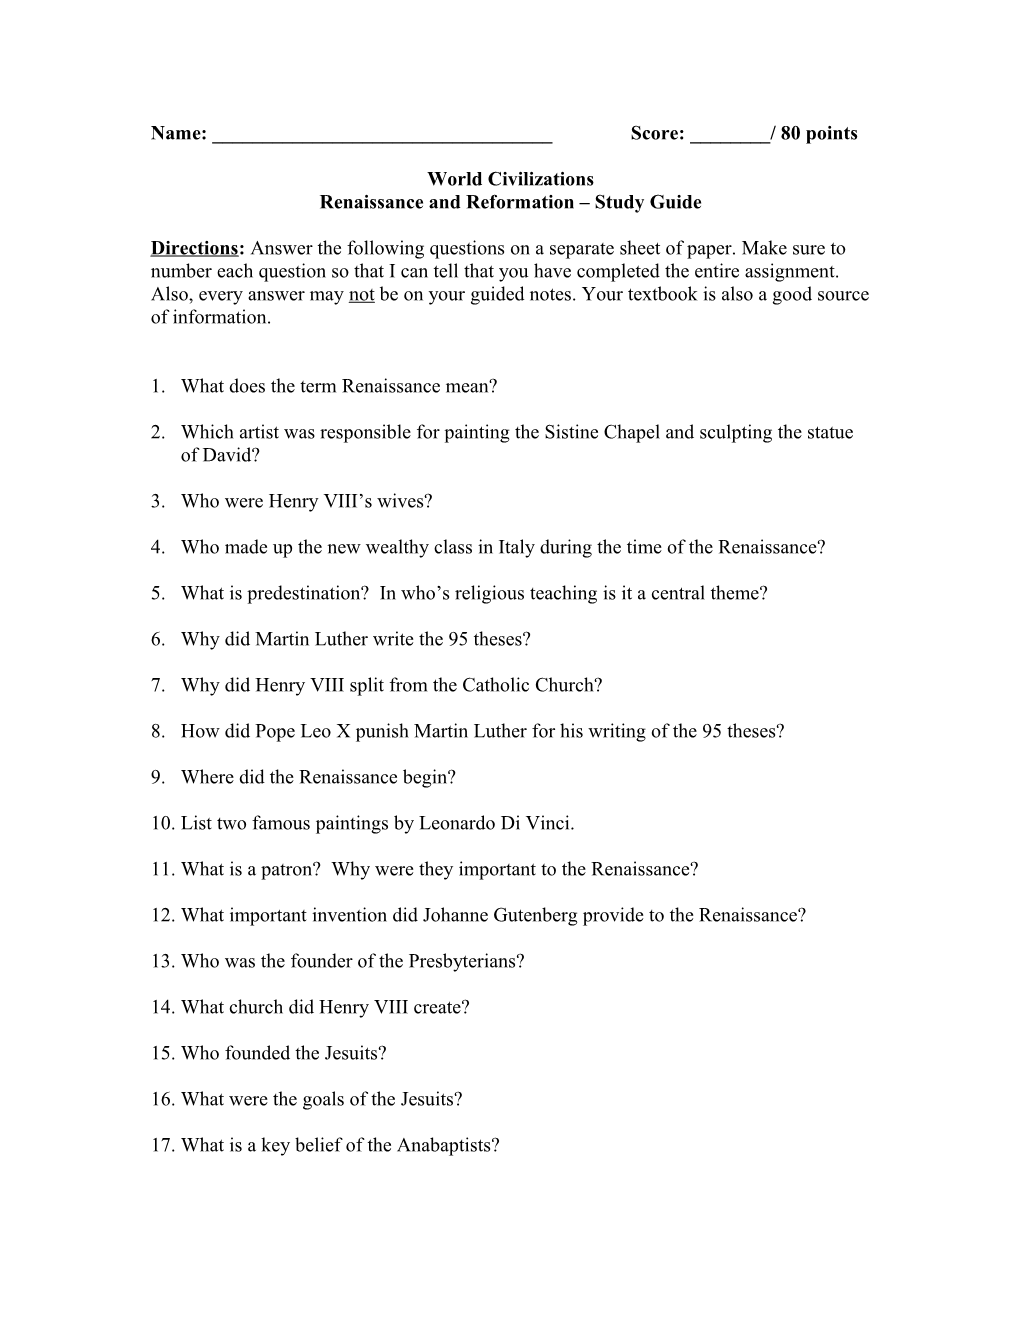 Renaissance and Reformation Study Guide